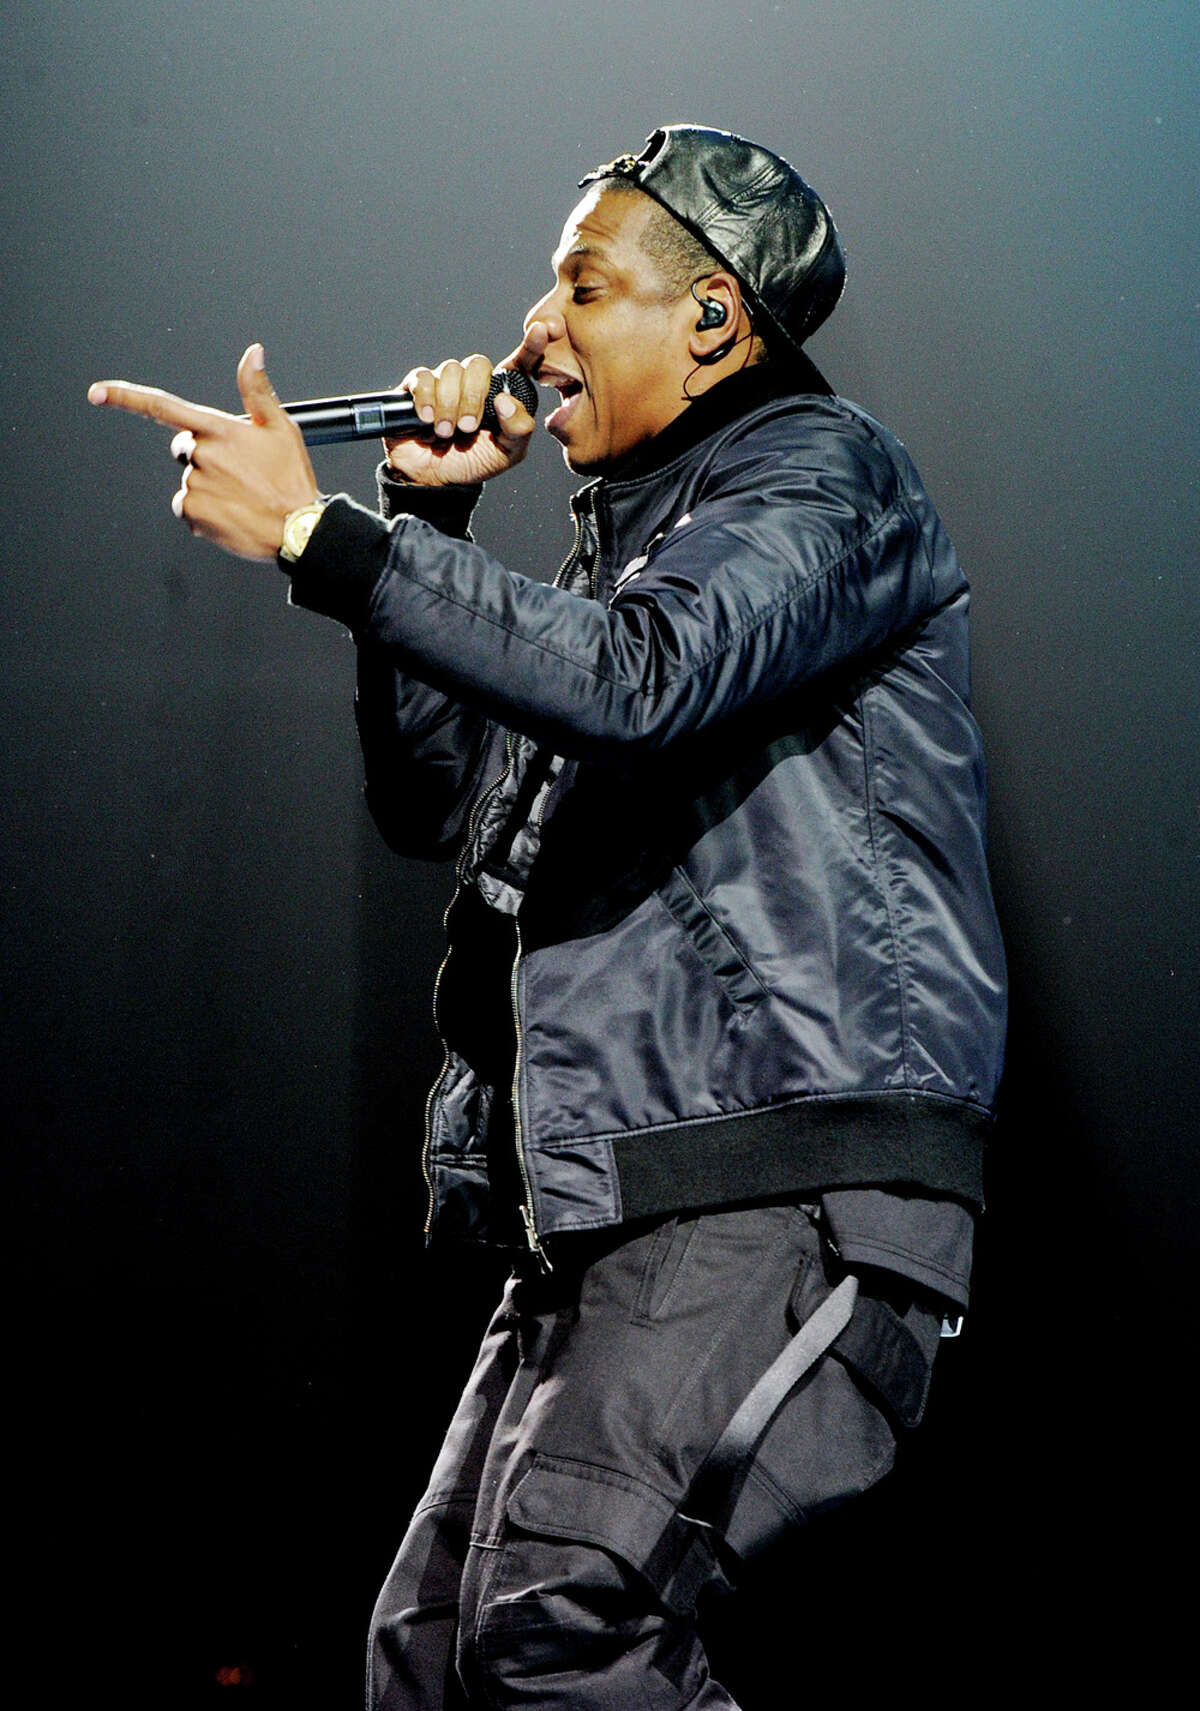 Hip Hop artist Jay Z performs at The Staples Center on Dec. 9, 2013 in Los Angeles.